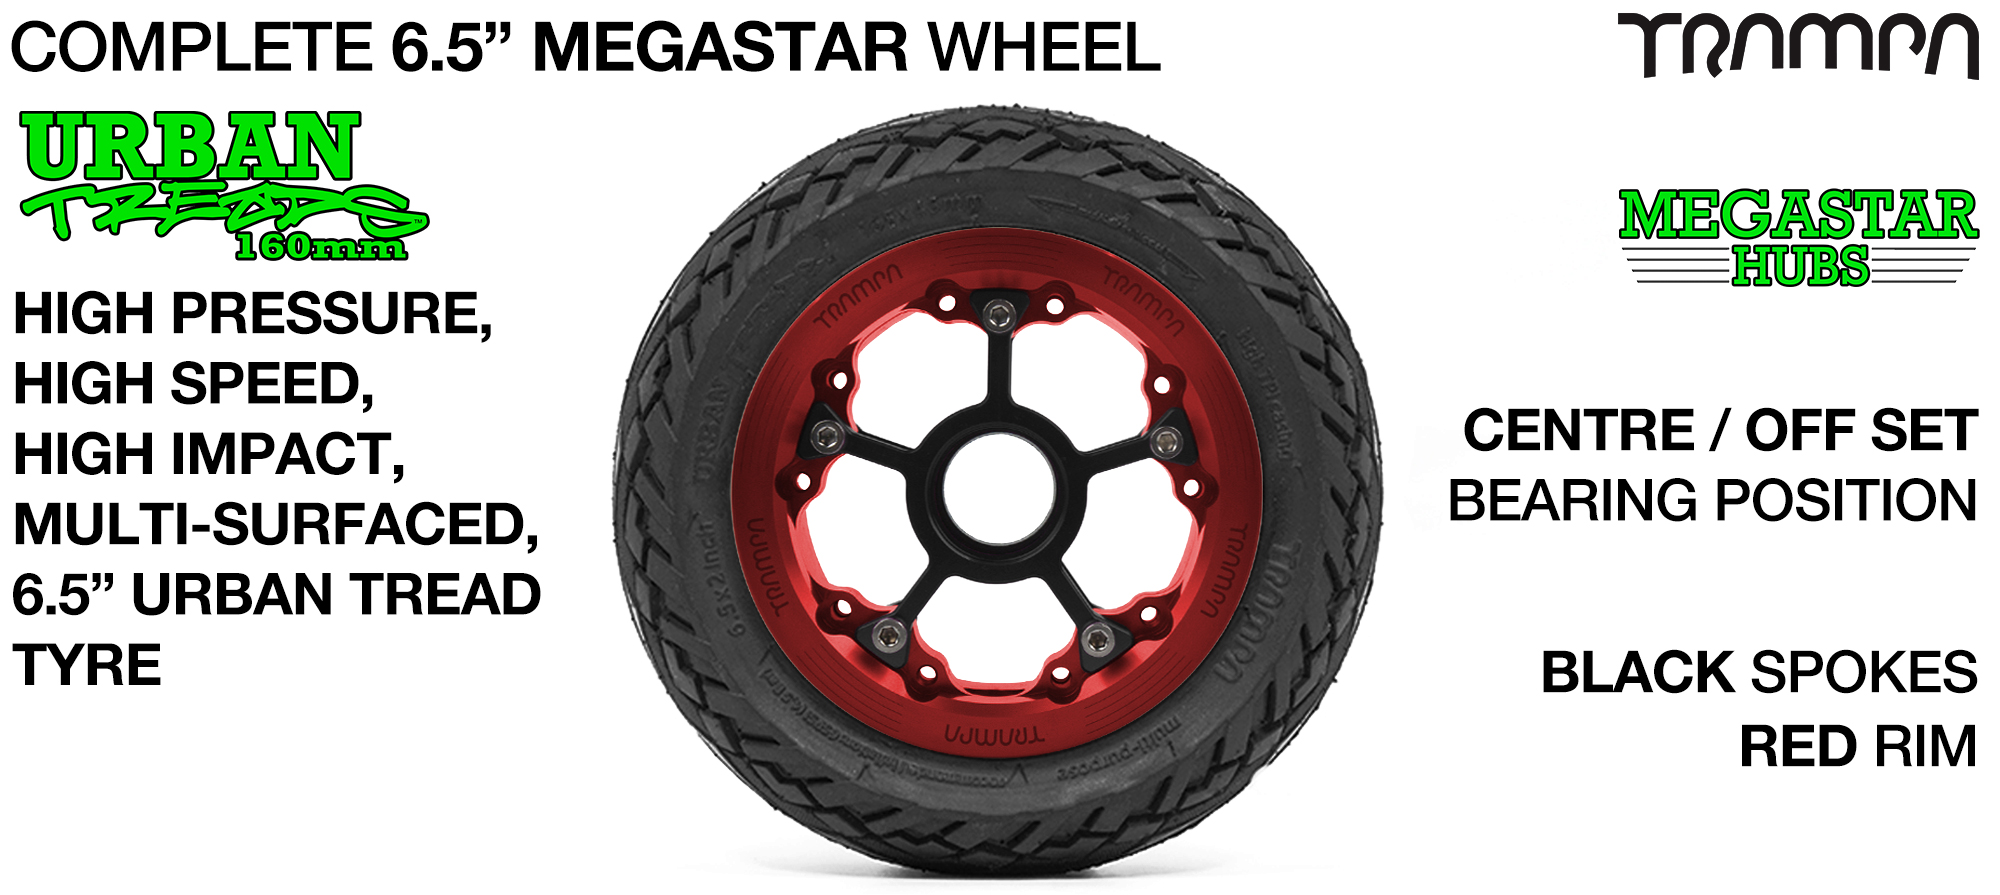 RED MEGASTAR Rims with BLACK Spokes & 6.5 Inch URBAN Treads Tyres 